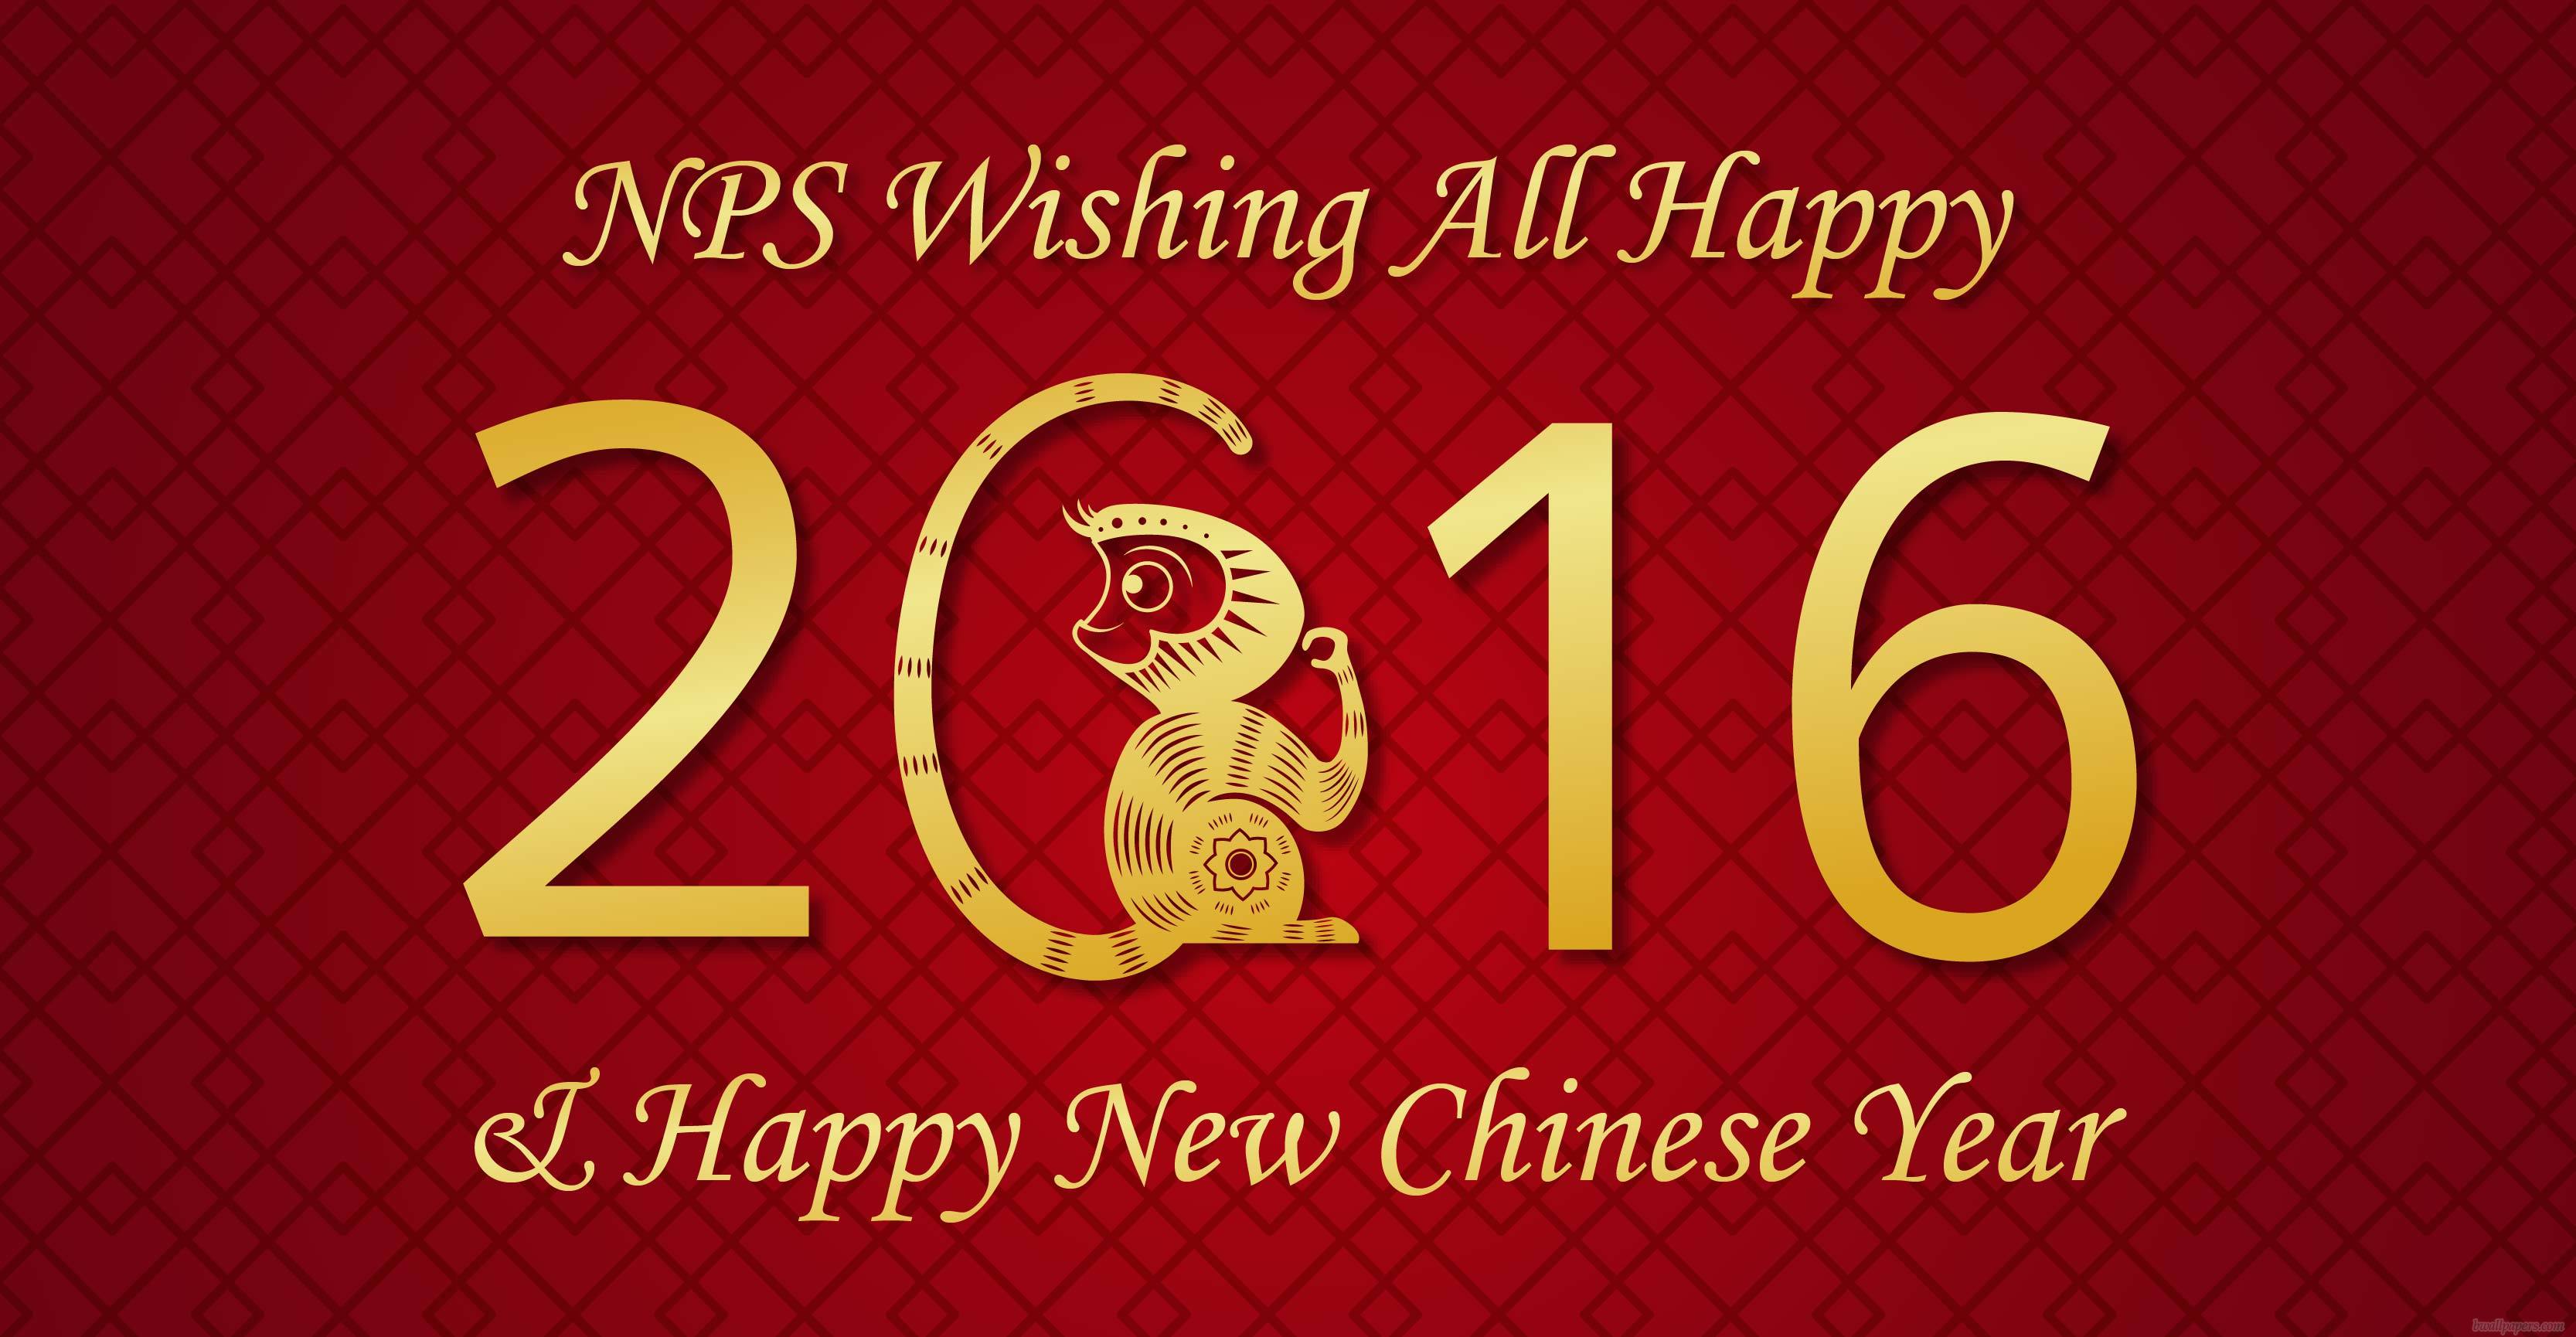 Chinese New Year 2016 Wallpaper   Wallpaper High Definition High